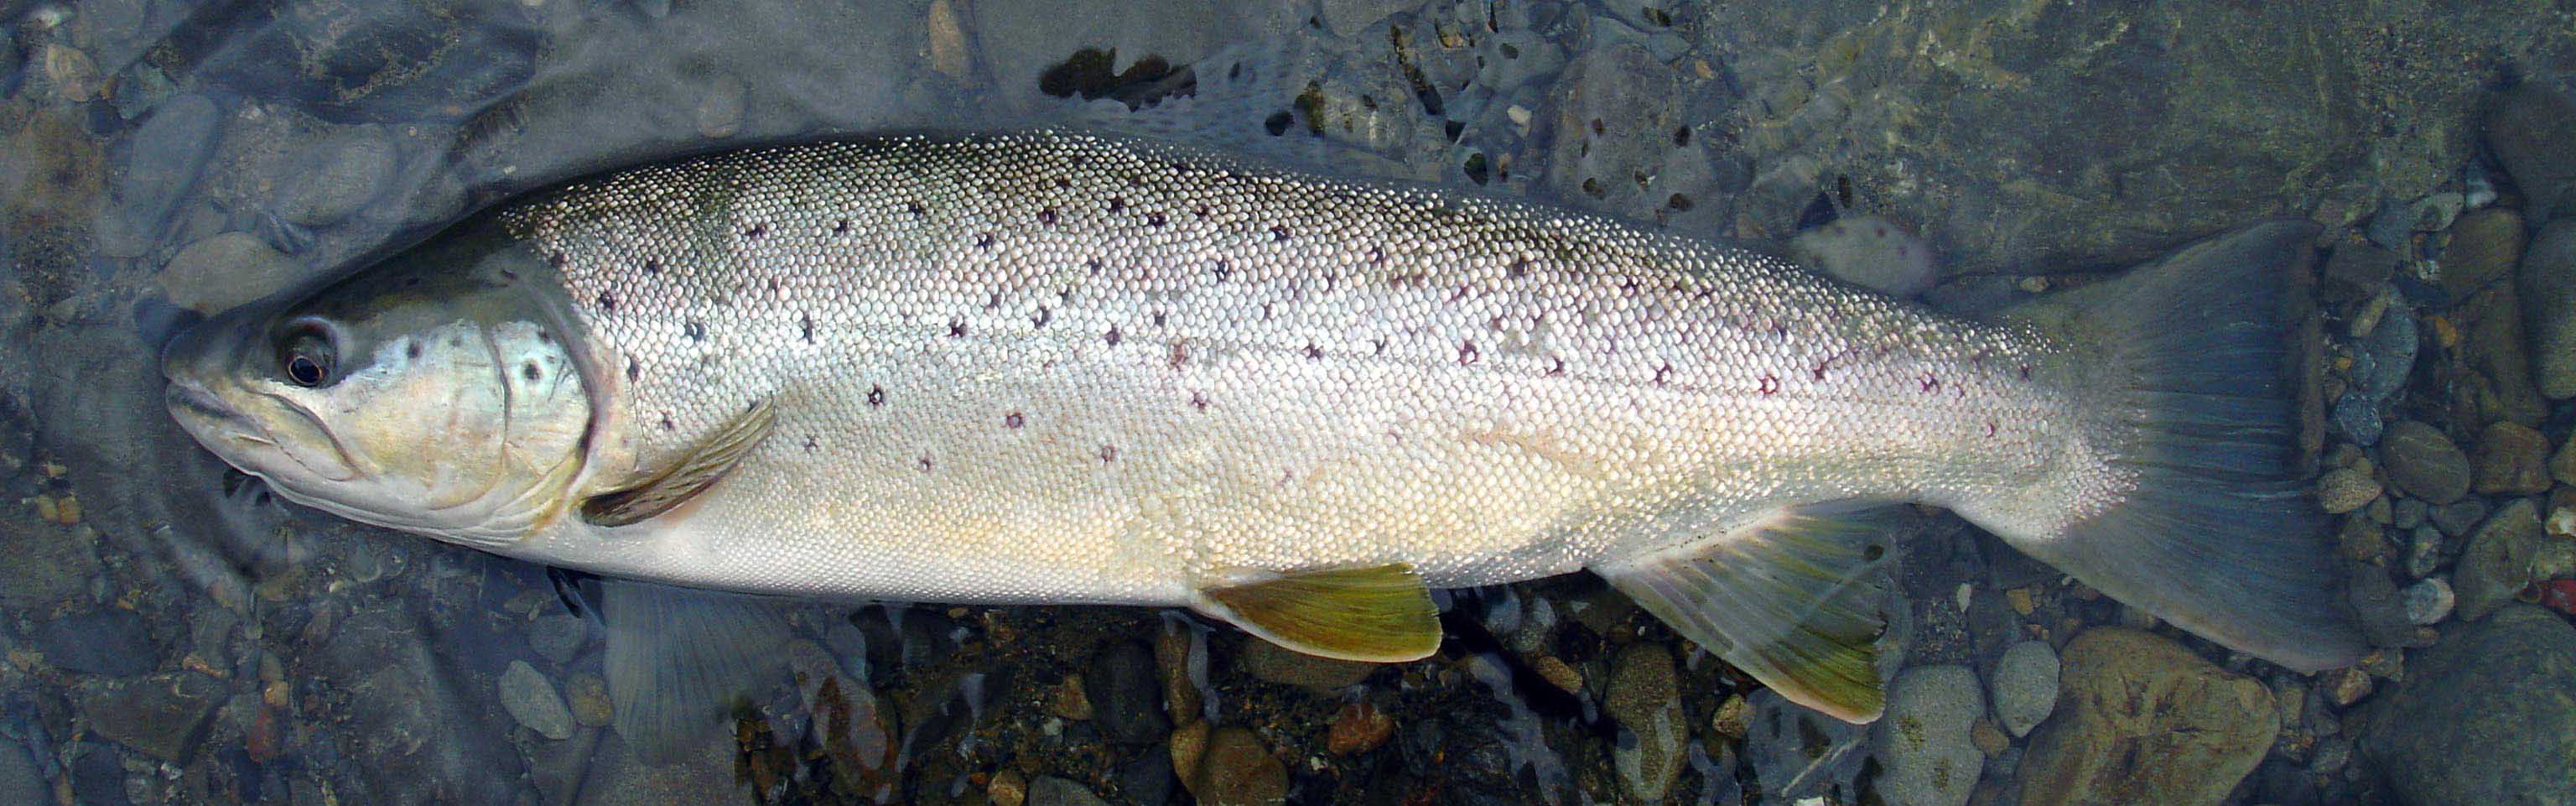 A magnificent silver sea trout, before being released back into water, lying in shallow dark gravelly river bed